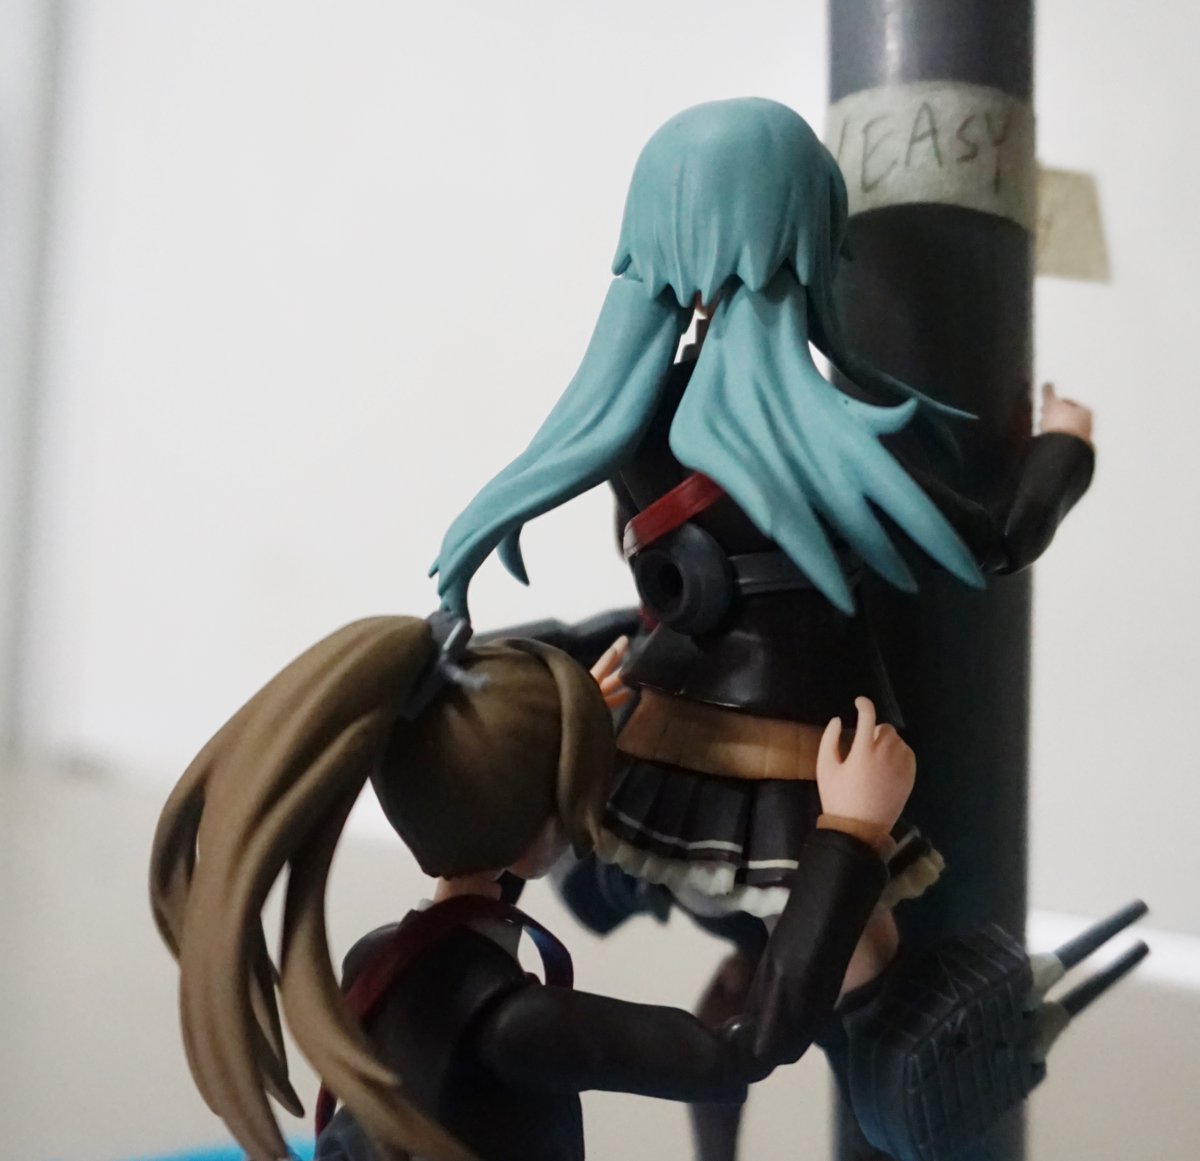 I forget that I have their Figma
got this idea after cleaning my mansion's room 